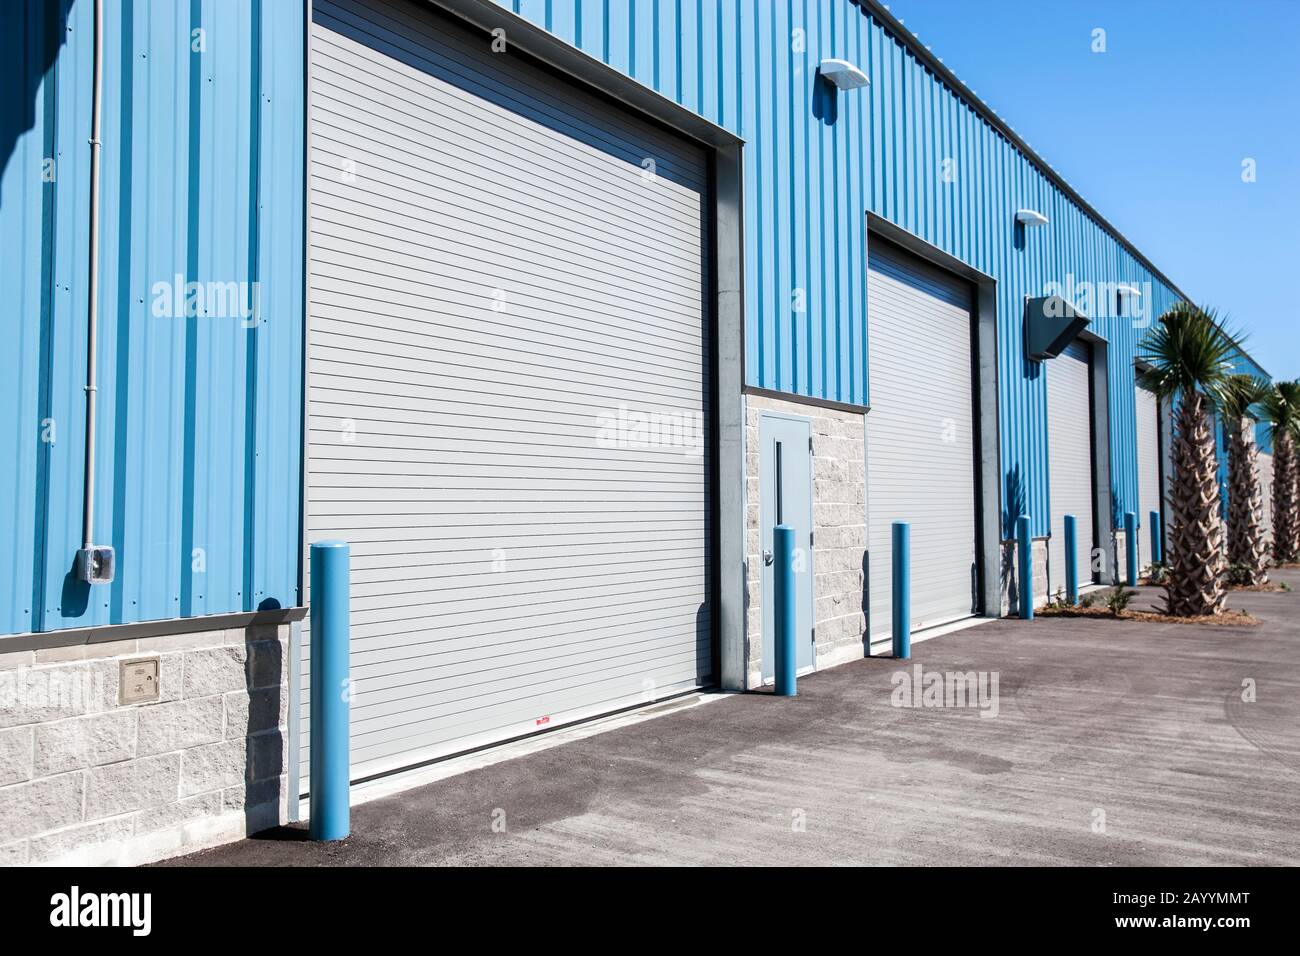 Ground level view of warehouse with roller shutter exterior doors Stock Photo